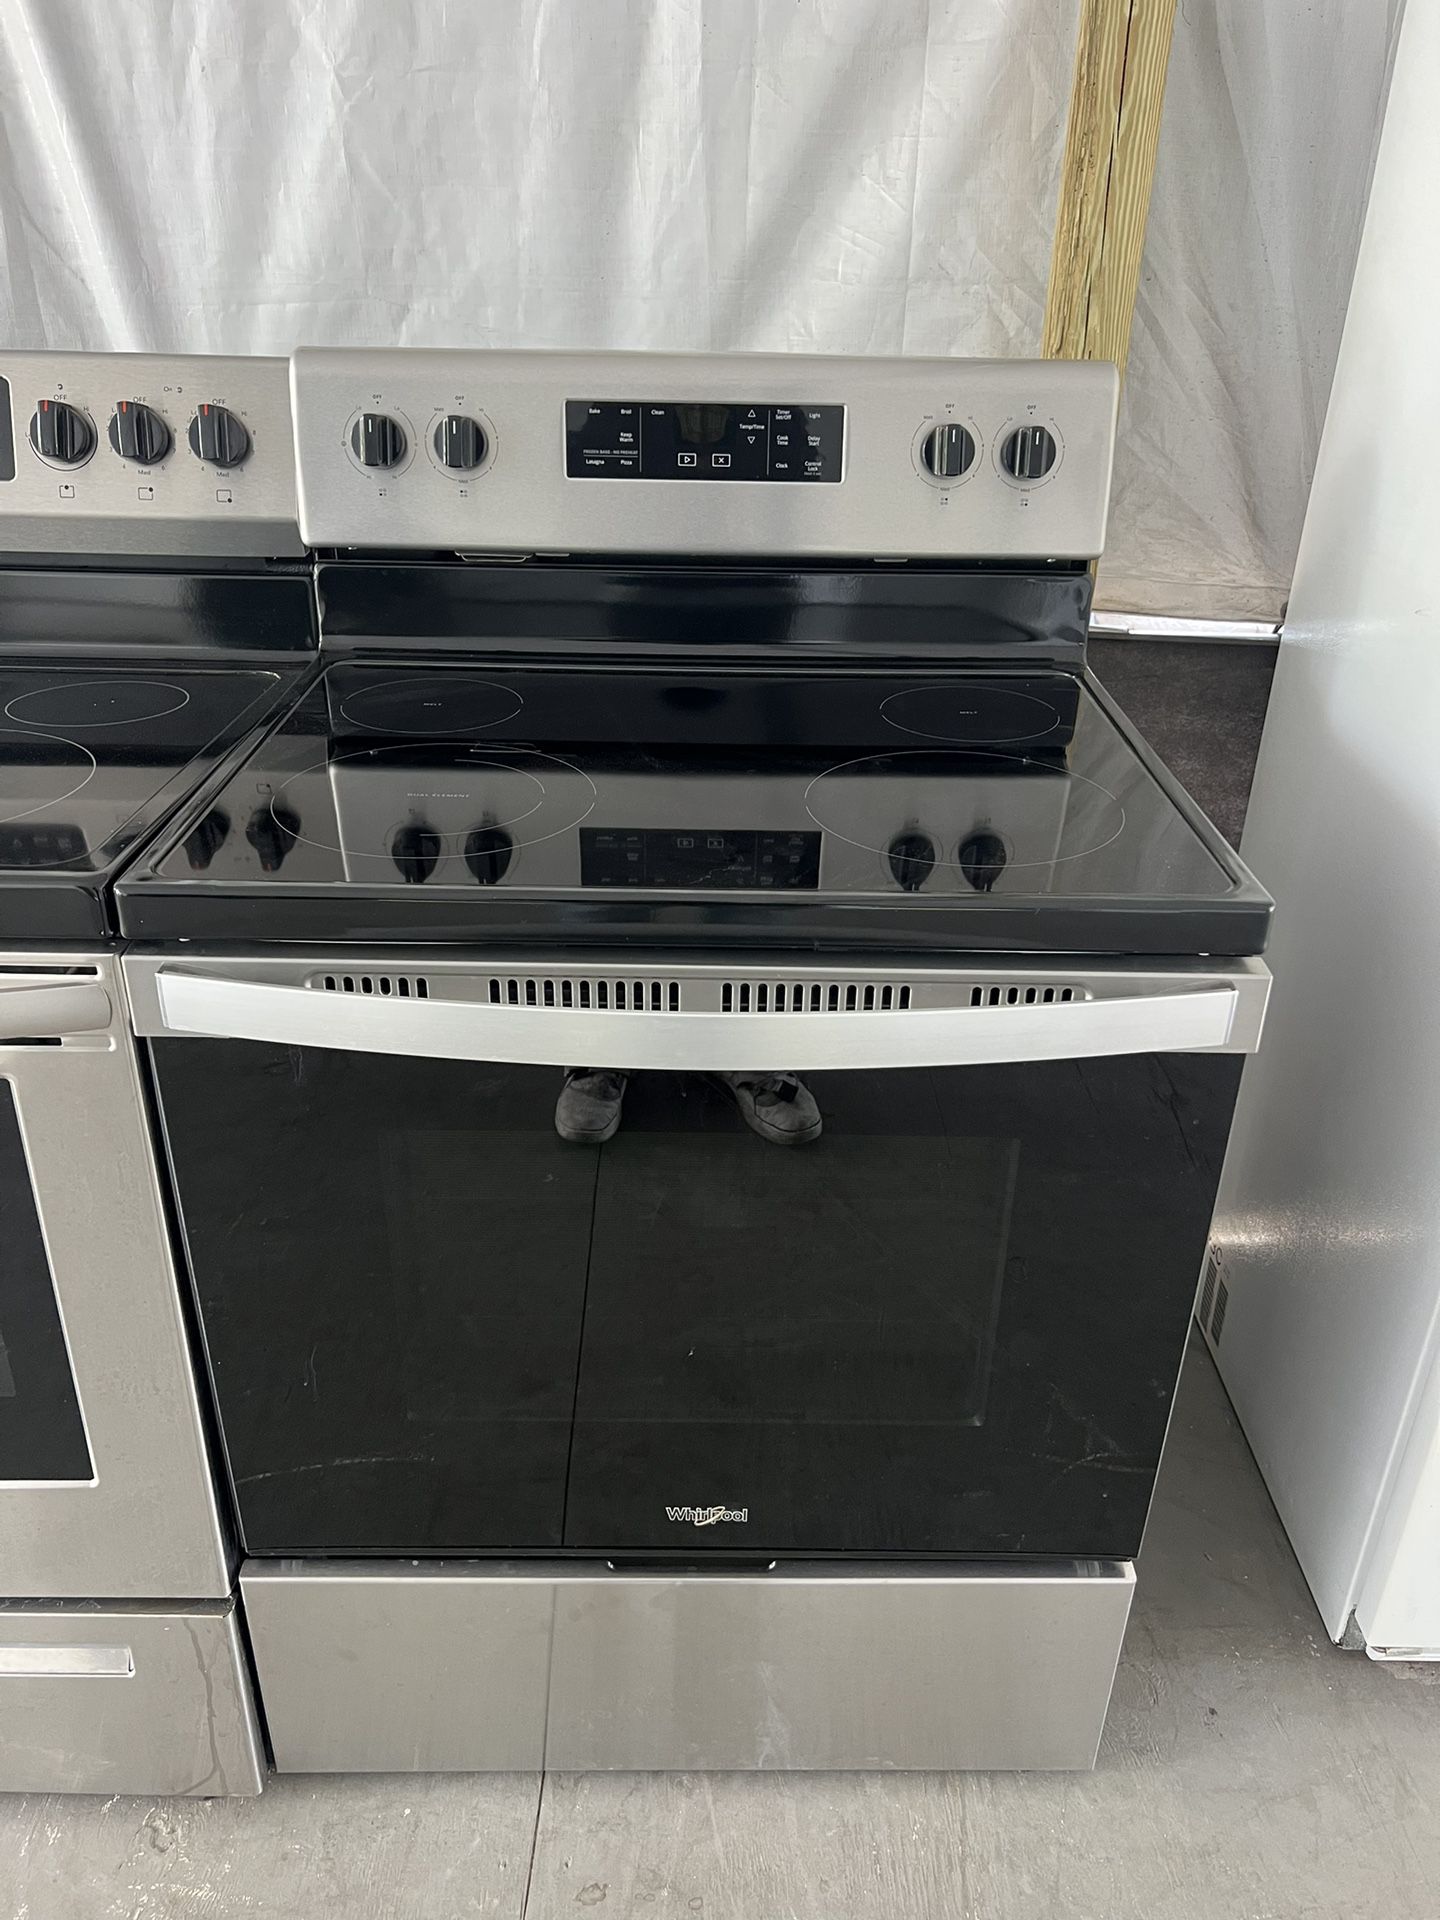 Whirlpool Stainless Steel Glasstop Stove   60 day warranty/ Located at:📍5415 Carmack Rd Tampa Fl 33610📍